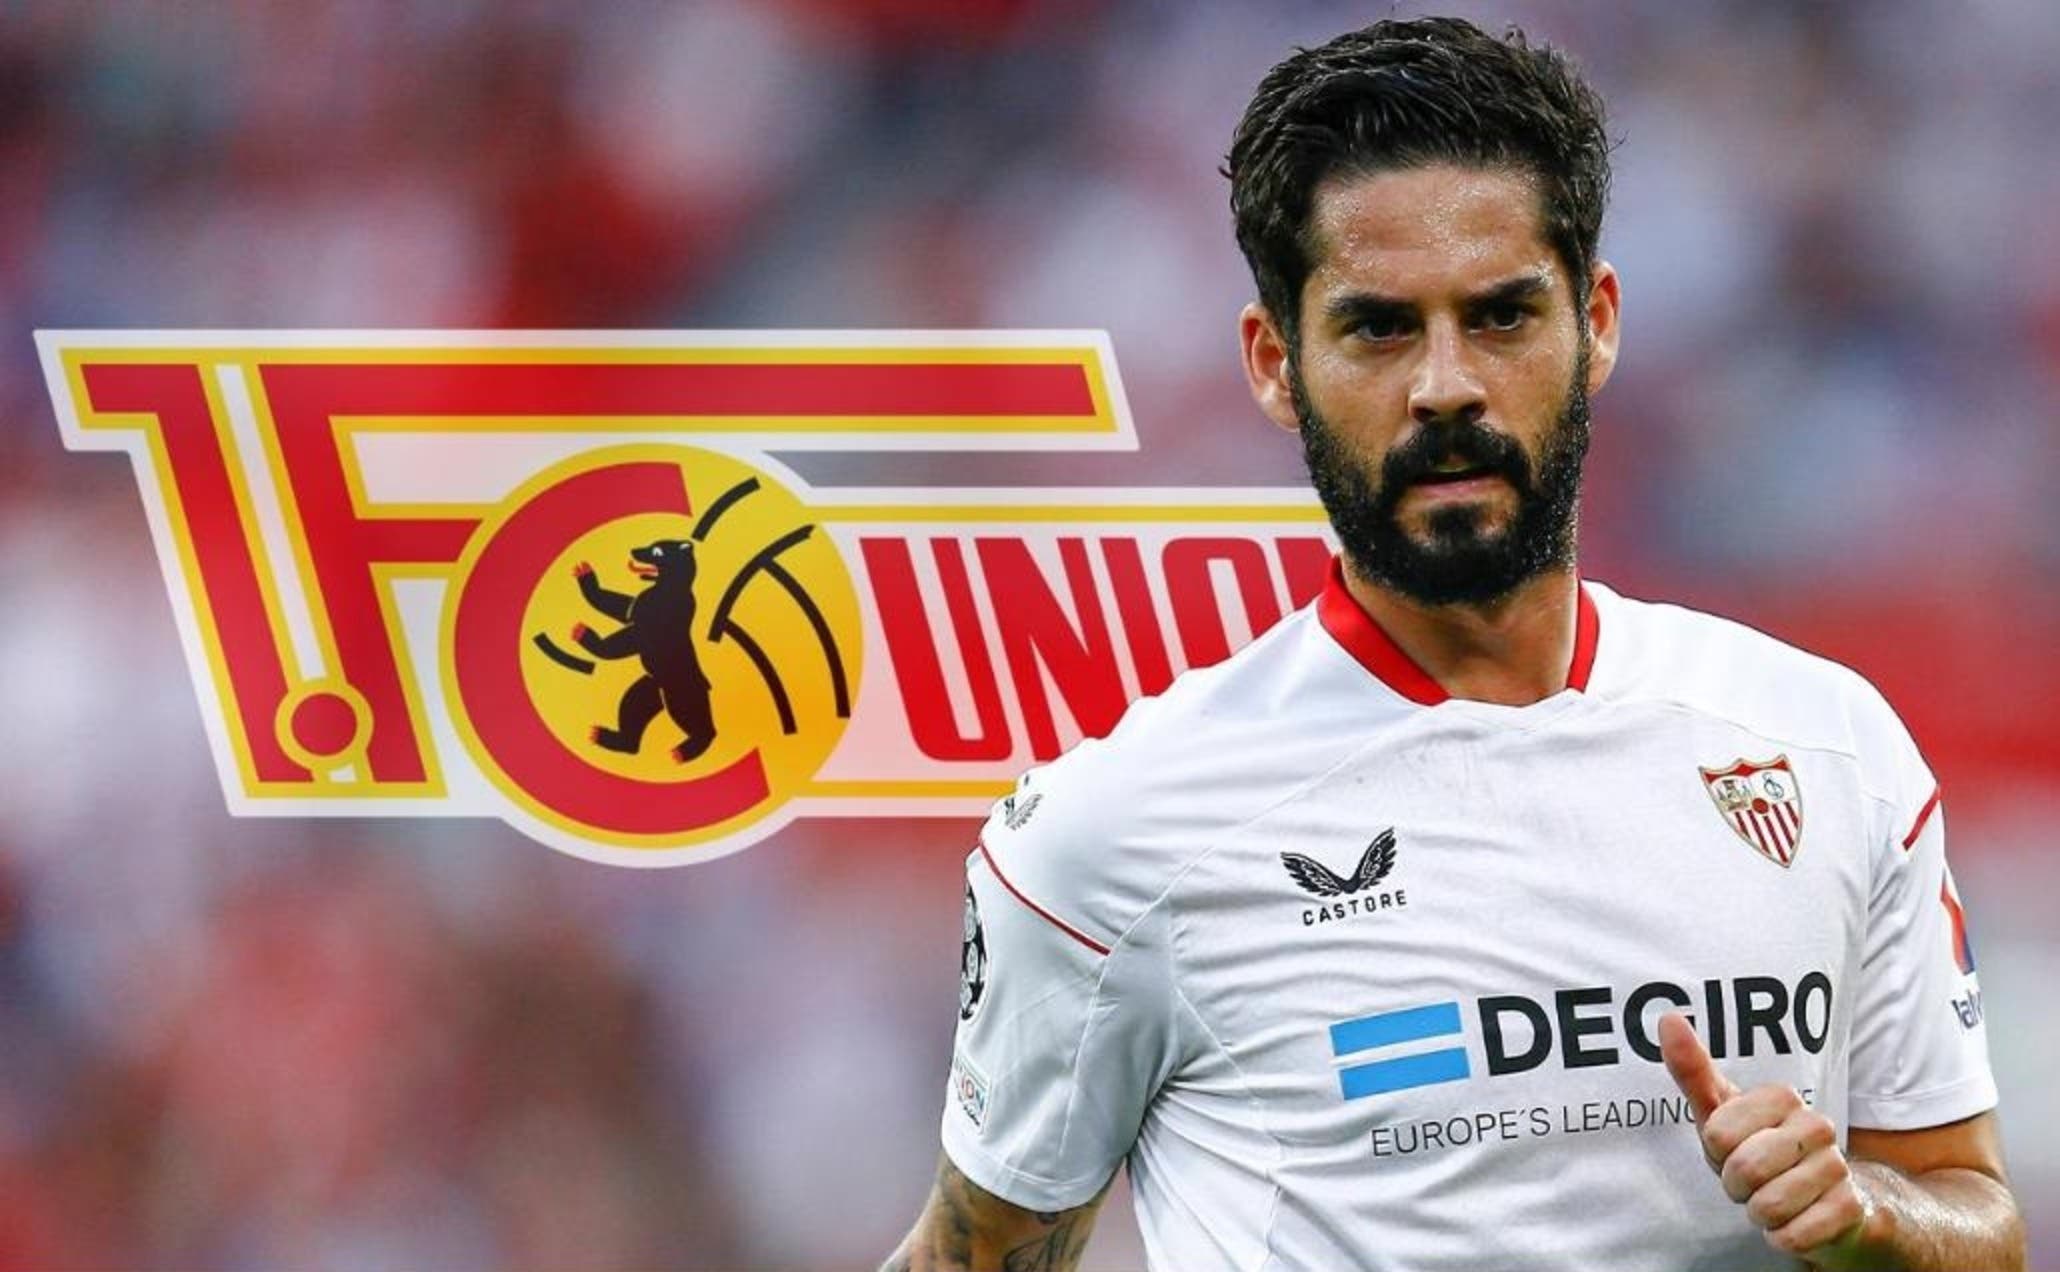 Isco rejected by Union Berlin for pesetero
